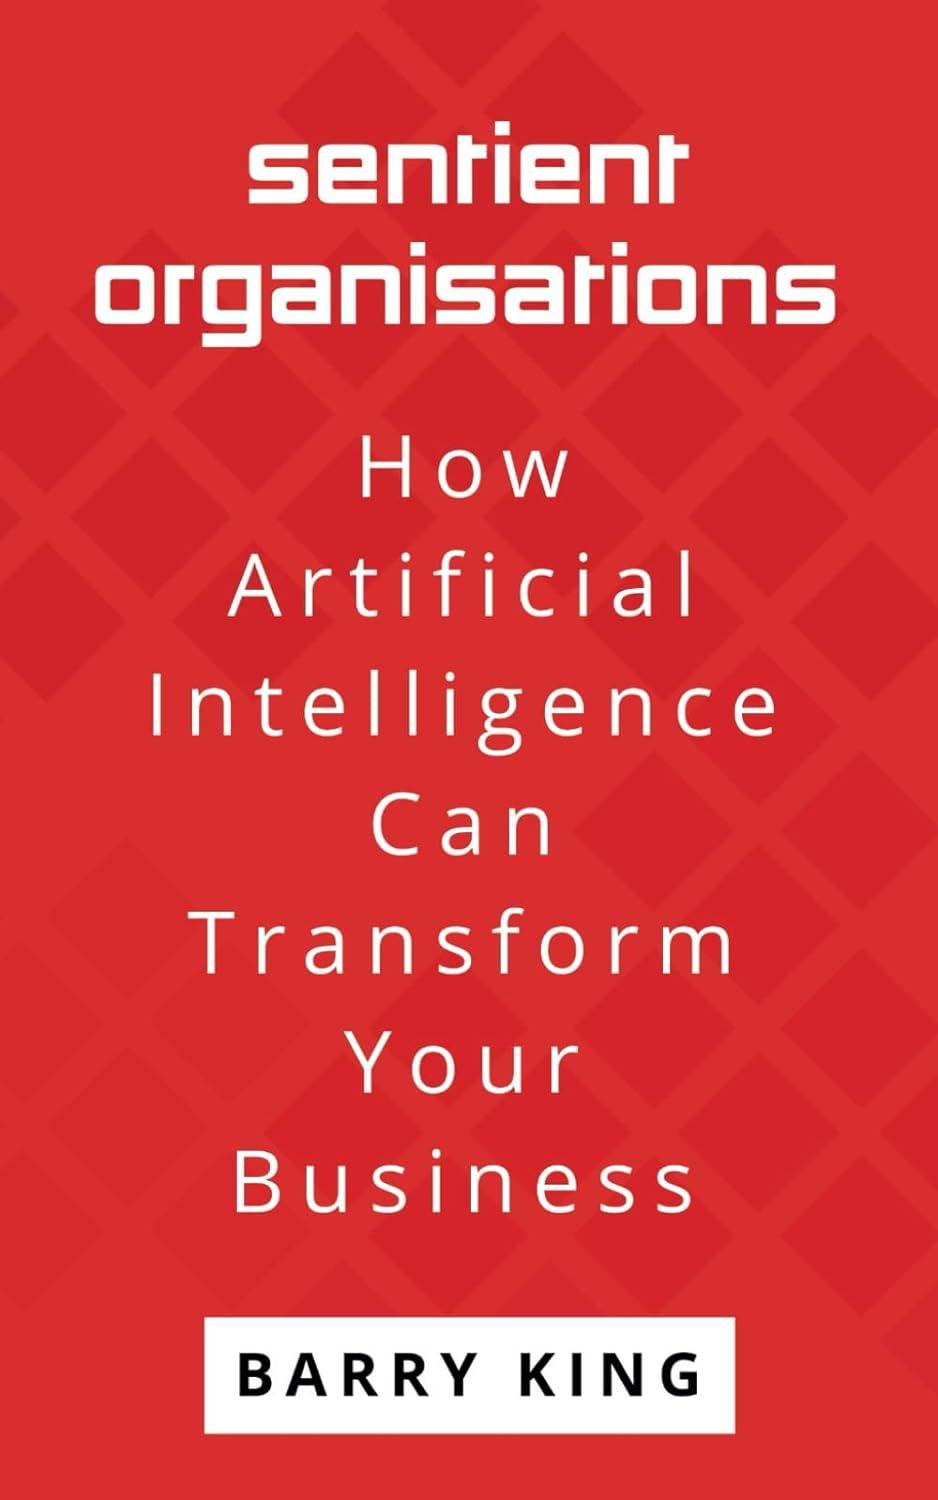 sentient organisations  how artificial intelligence can transform your business 1st edition barry king